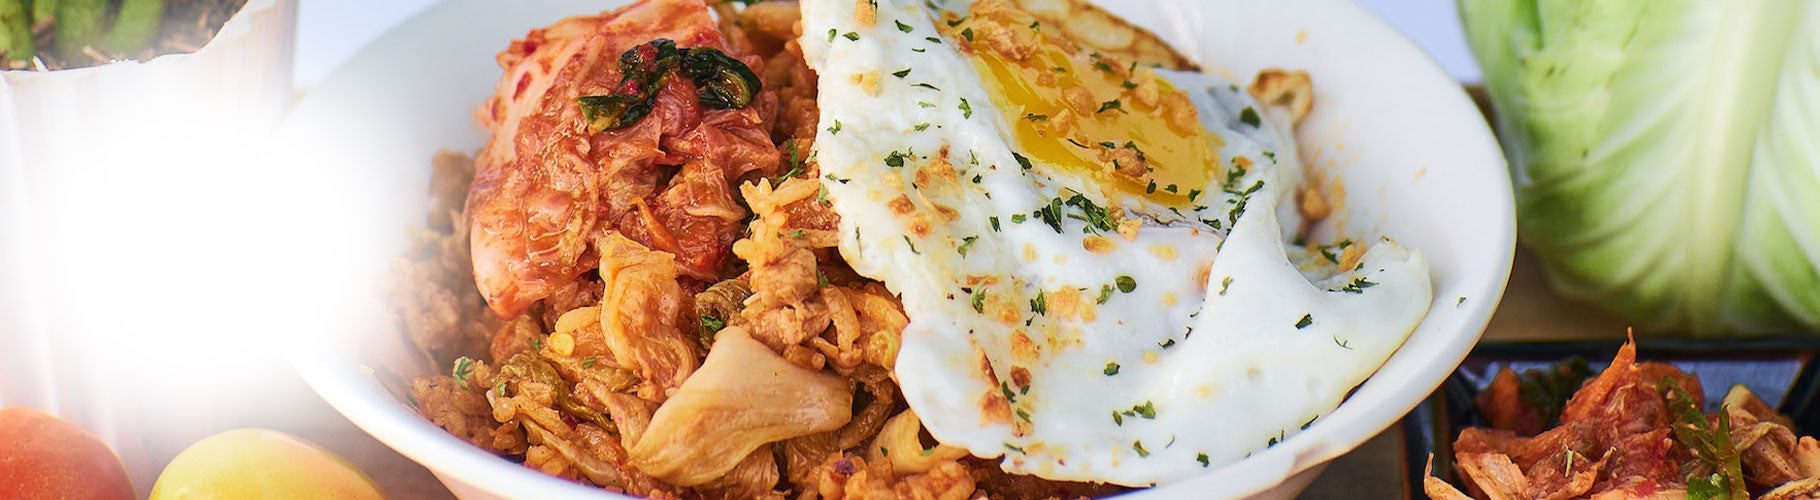 An image that shows a kimchi ffried rice